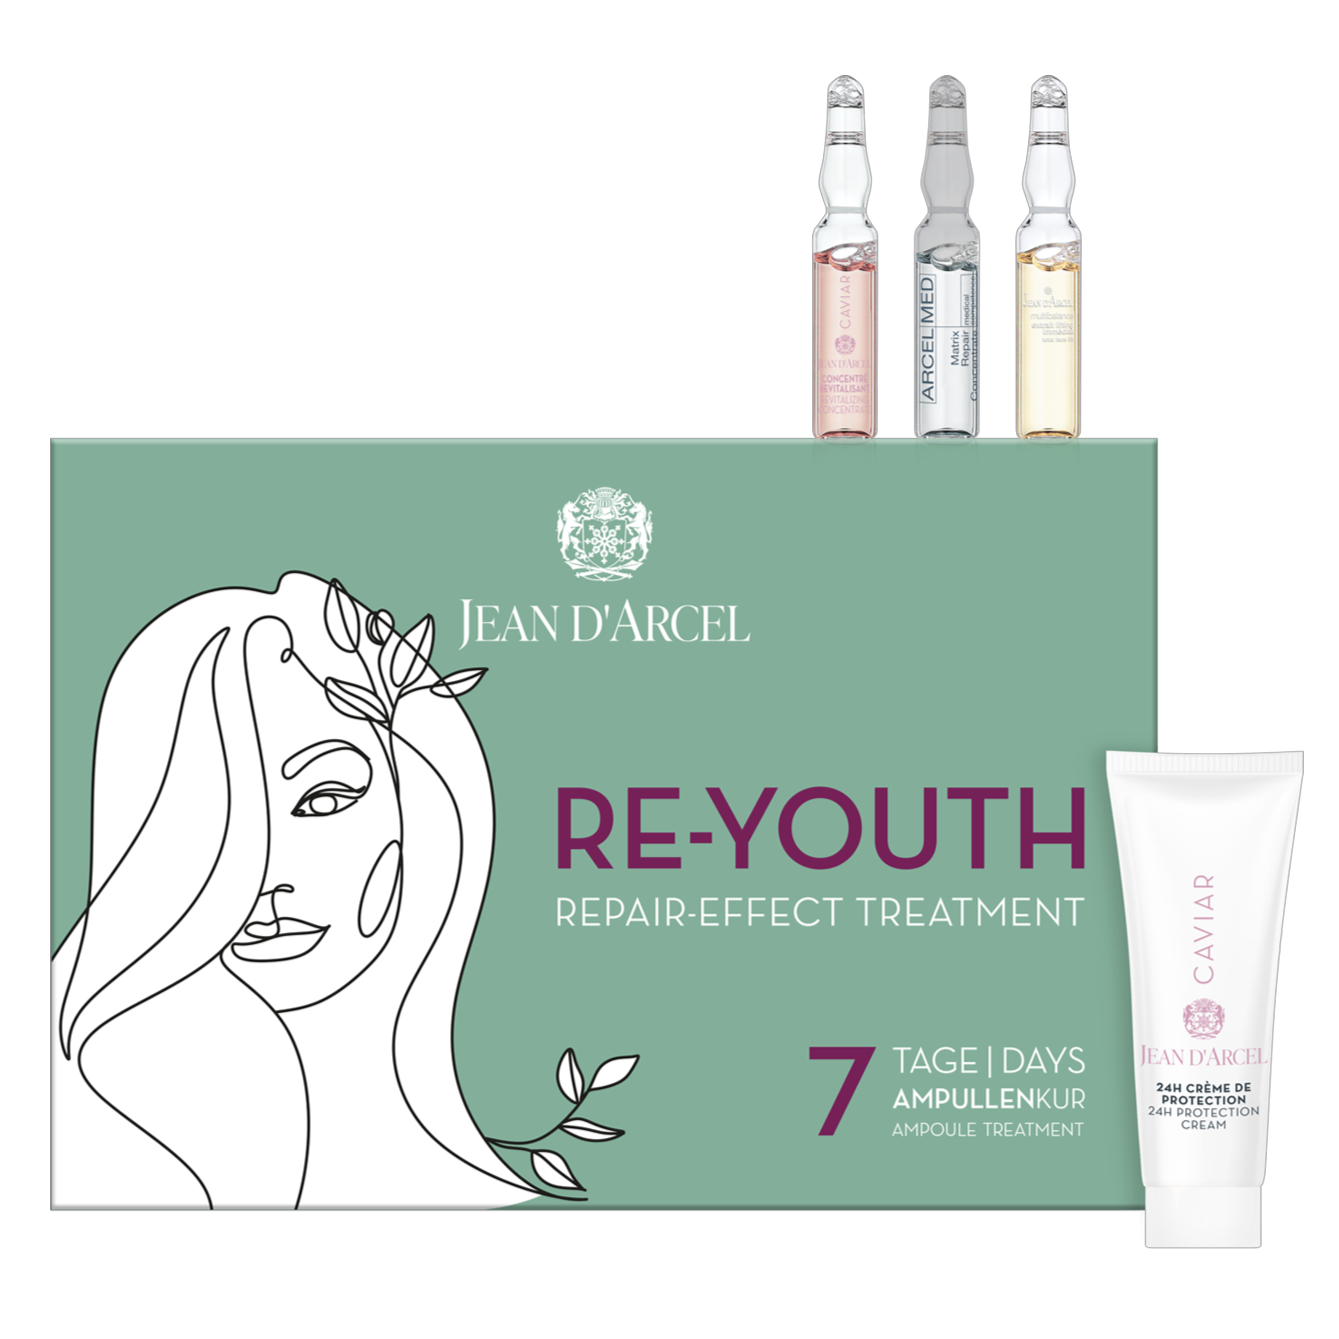 Re-youth repair effect treatment